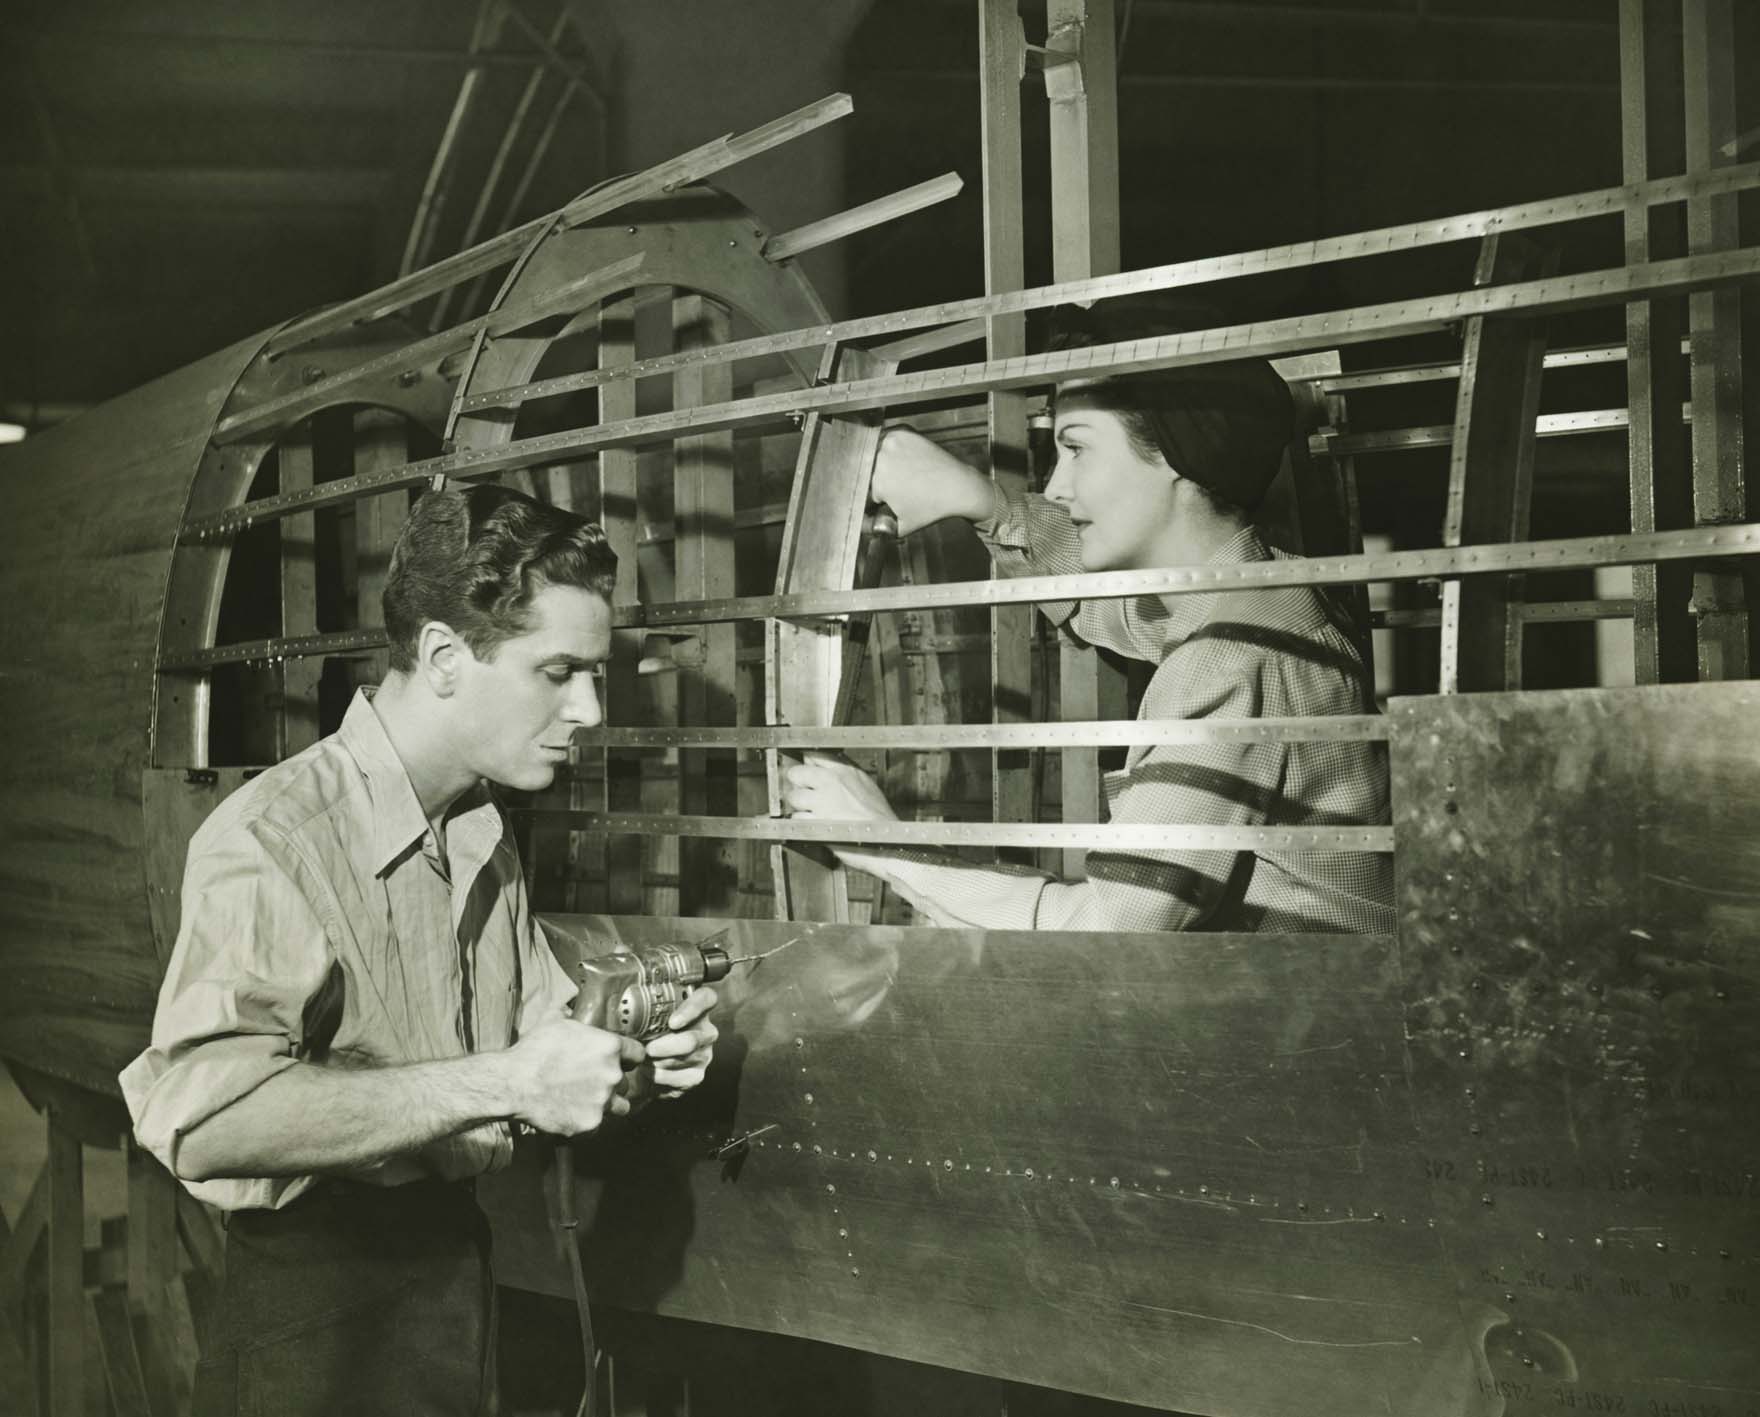 World War II photo: Young man and woman working in plane body in factory